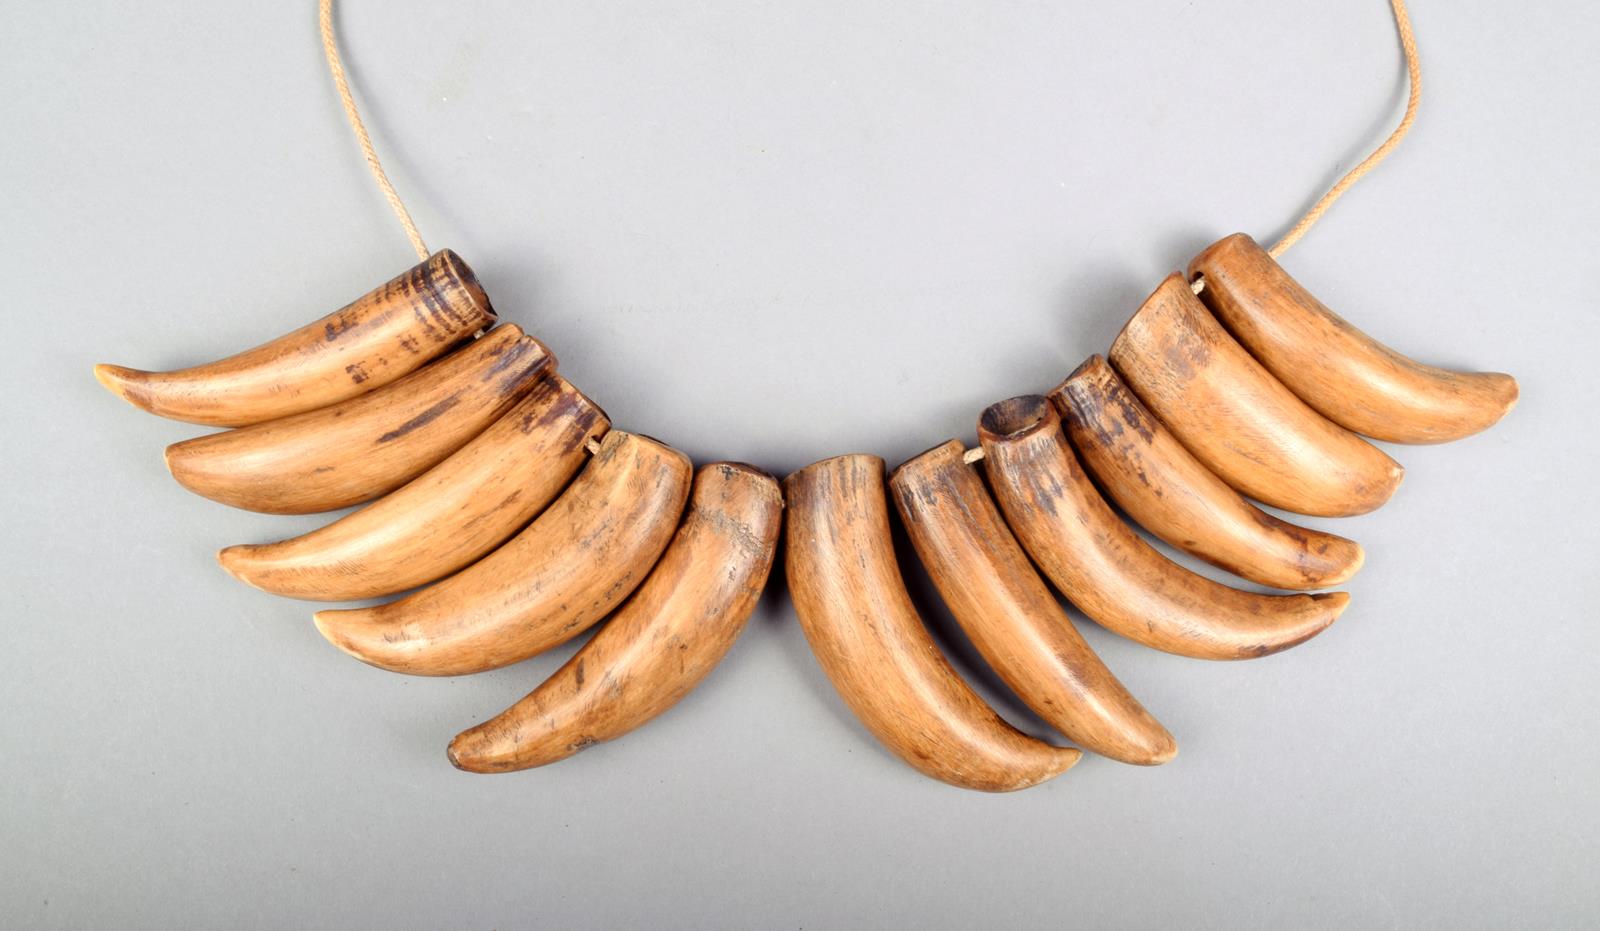 A Fiji sperm whale tooth necklace, Sisi Polynesia with eleven teeth pierced for attachment with